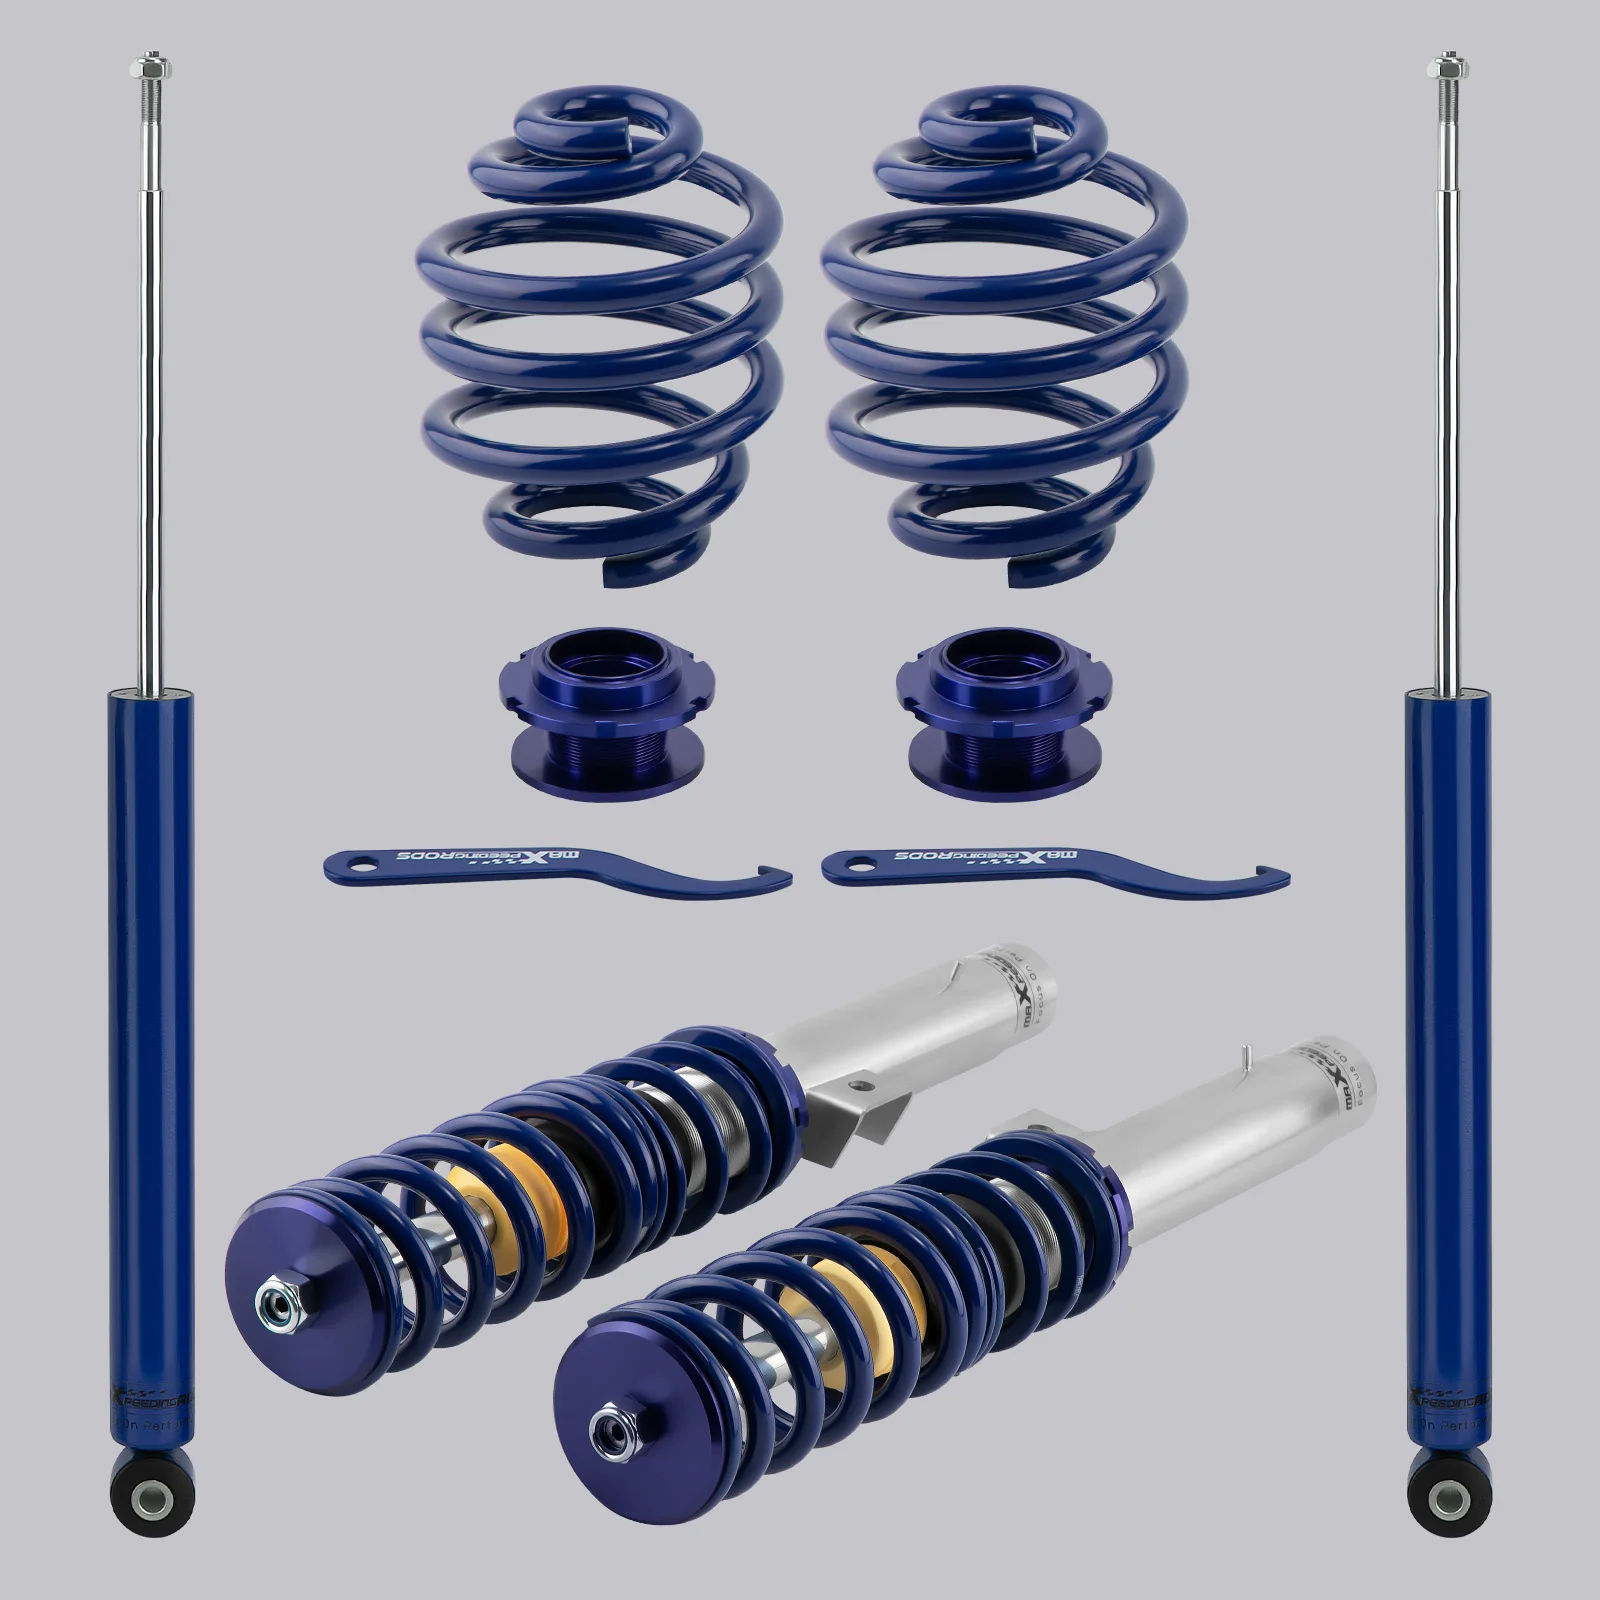 

Coilover For BMW E46 Saloon 320i 325i 328i 330i 318d 320d 330d Height Adjustable Spring Coilovers Shock Strut Shock Absorbers